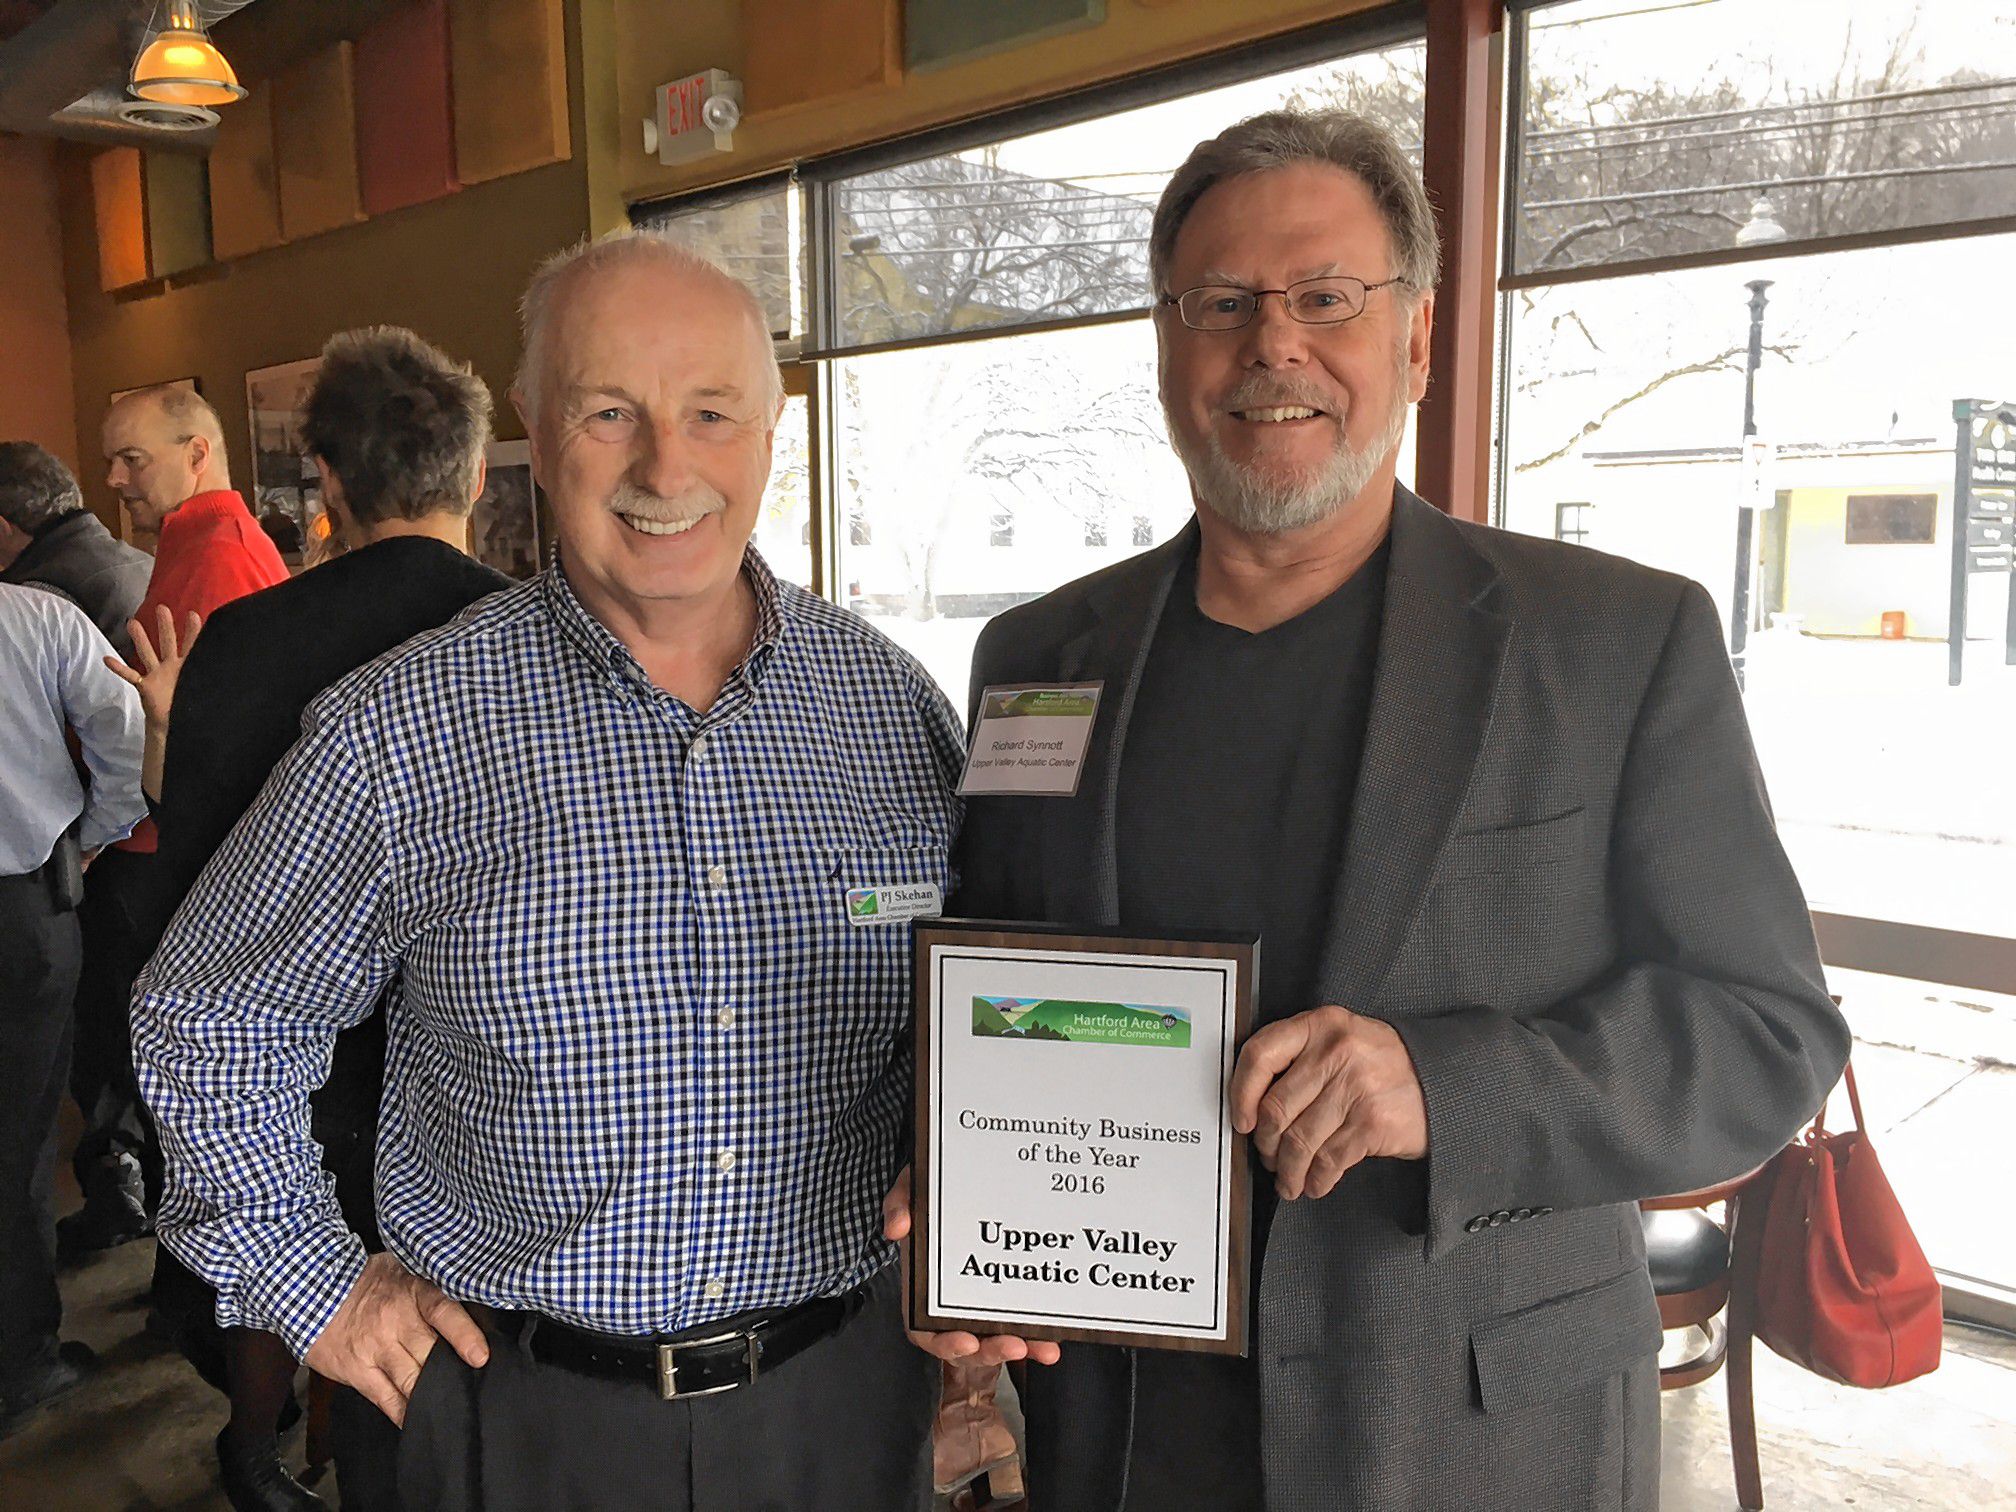 Rich Synnott, right, executive director of the Upper Valley Aquatic Center, accepted the Community Business of the Year award from P.J. Skehan of the Hartford Area Chamber of Commerce. (Courtesy photograph)